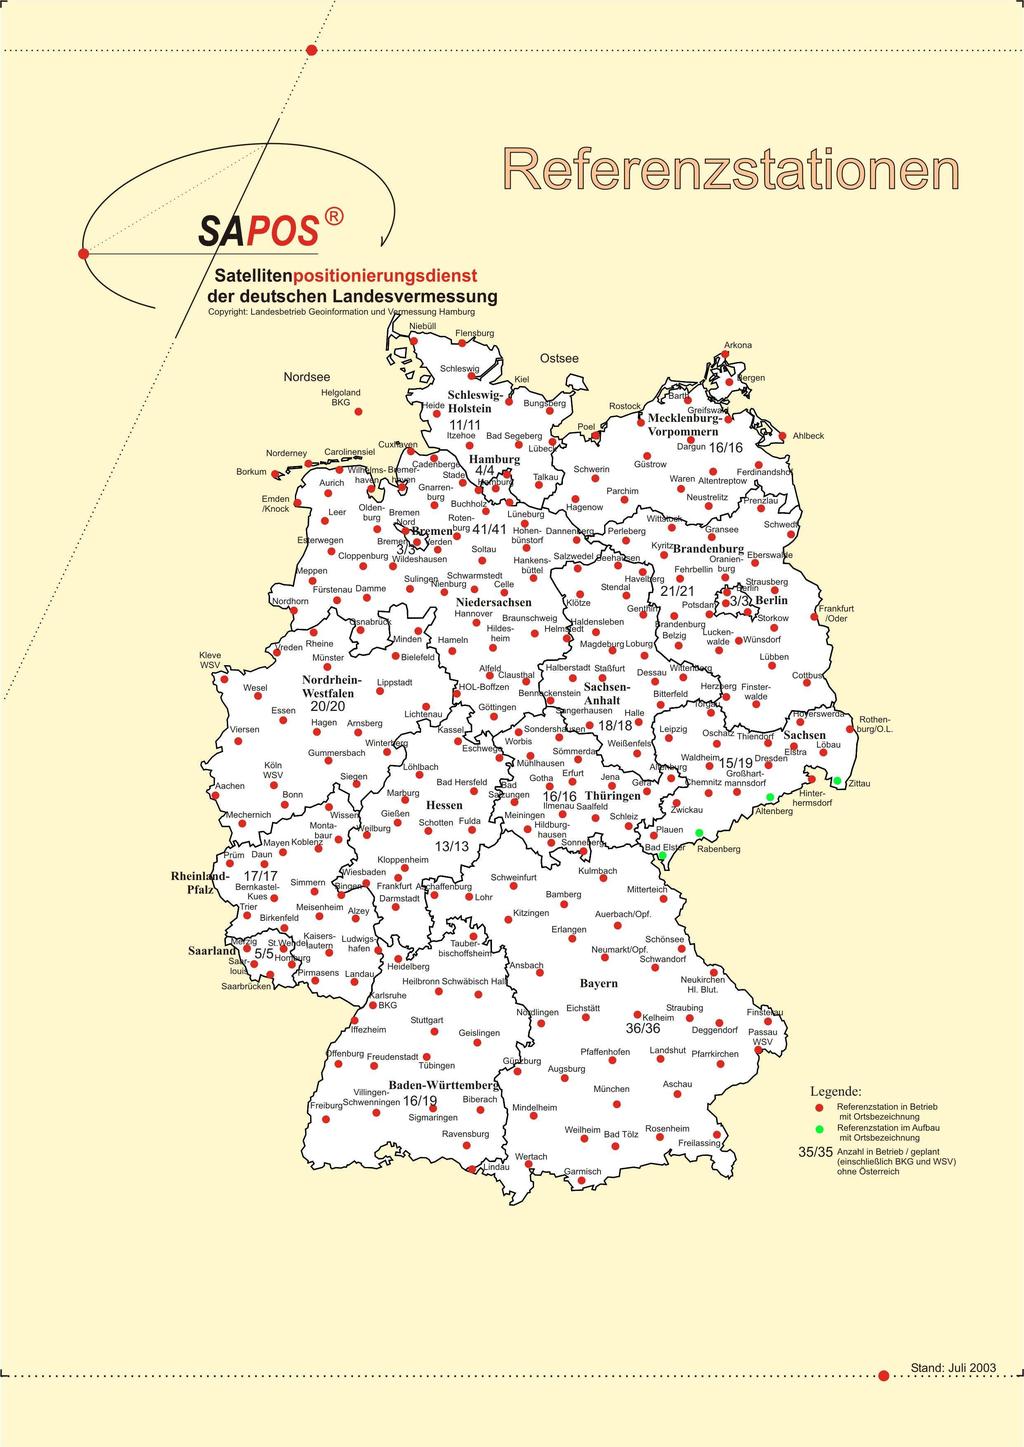 Reference System ETRS89 SAPOS service in Germany with 250 reference stations 4 reference stations in Hamburg